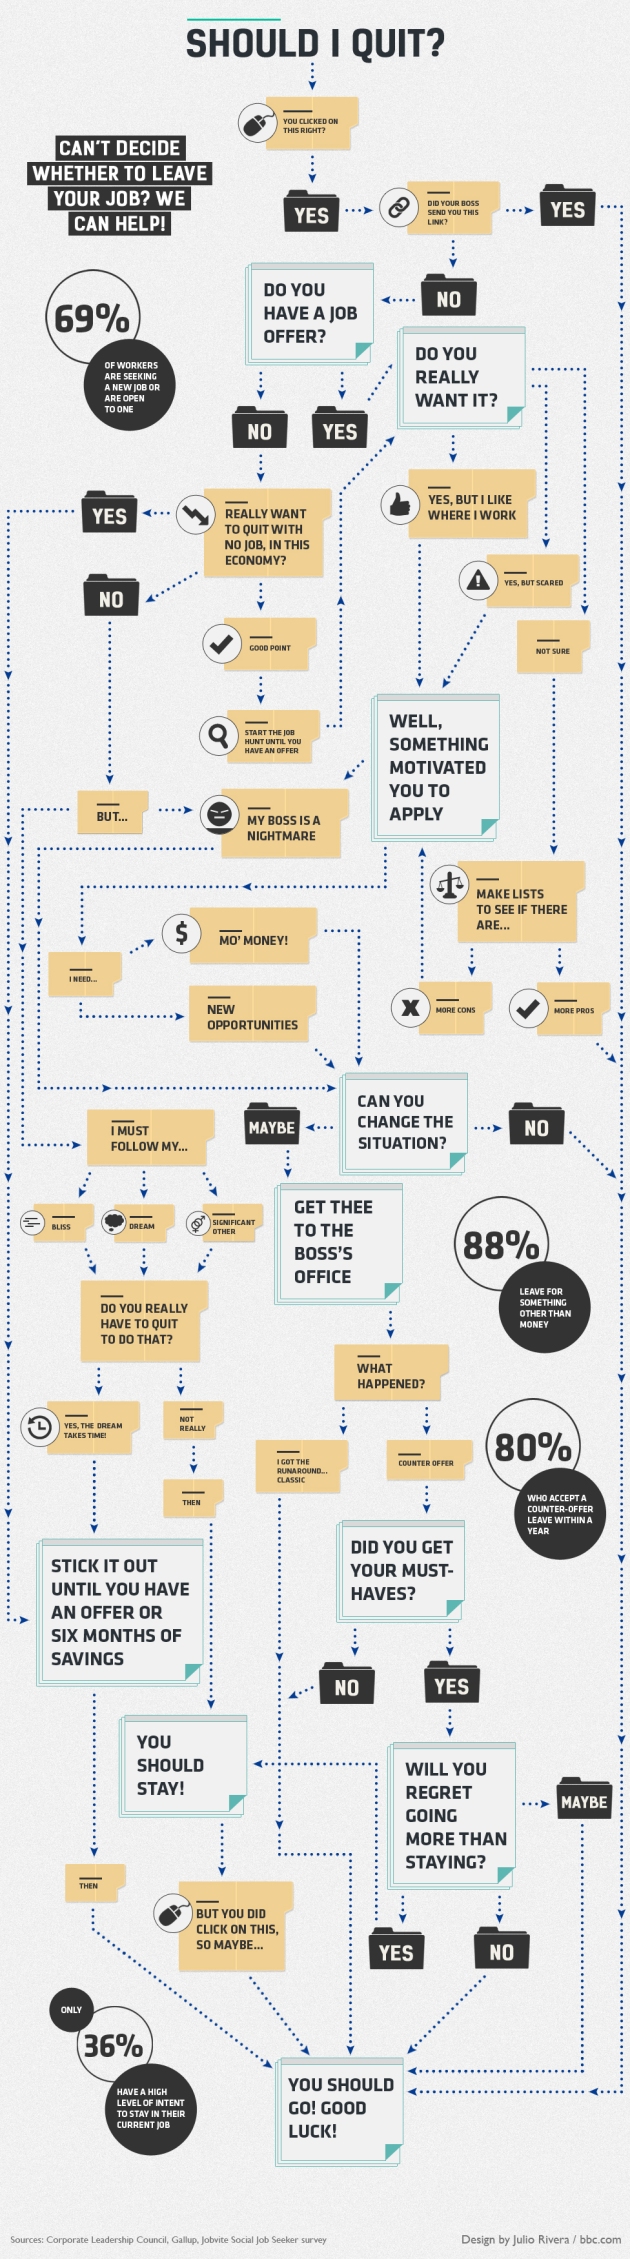 Infographic - Should I Quit?